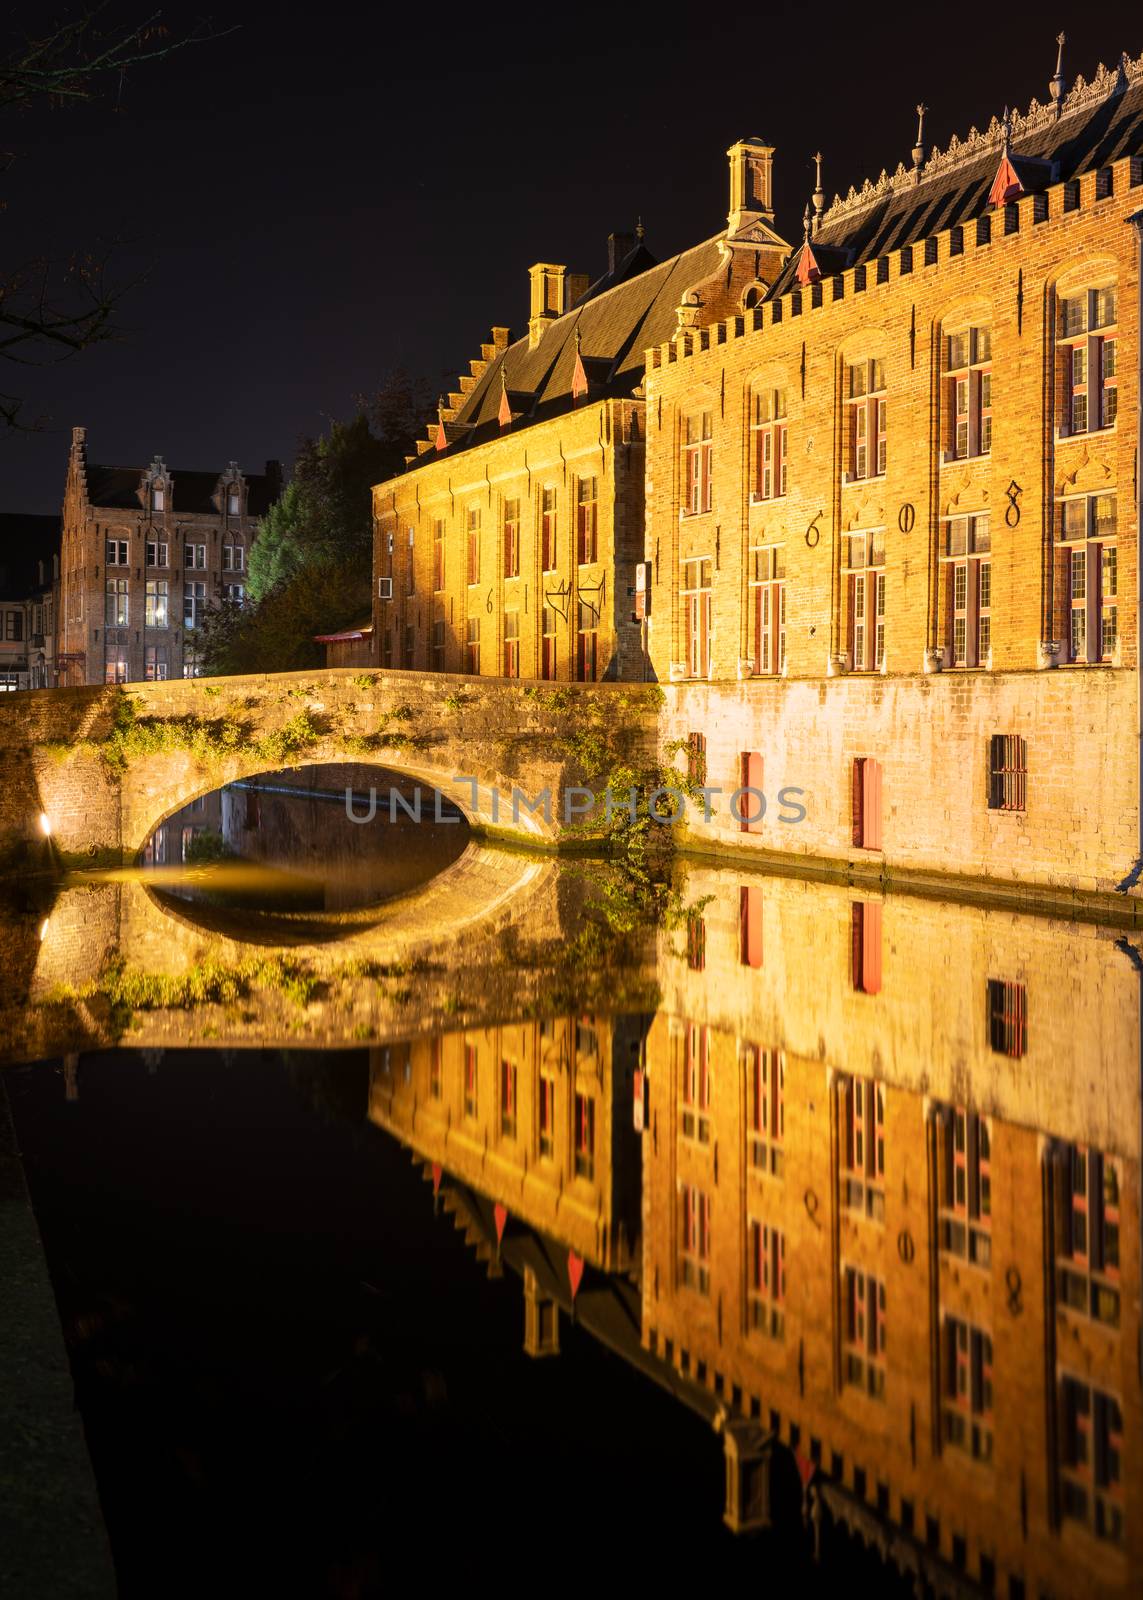 Evening mood with illuminated buildings in the historic city of Bruges, Belgium